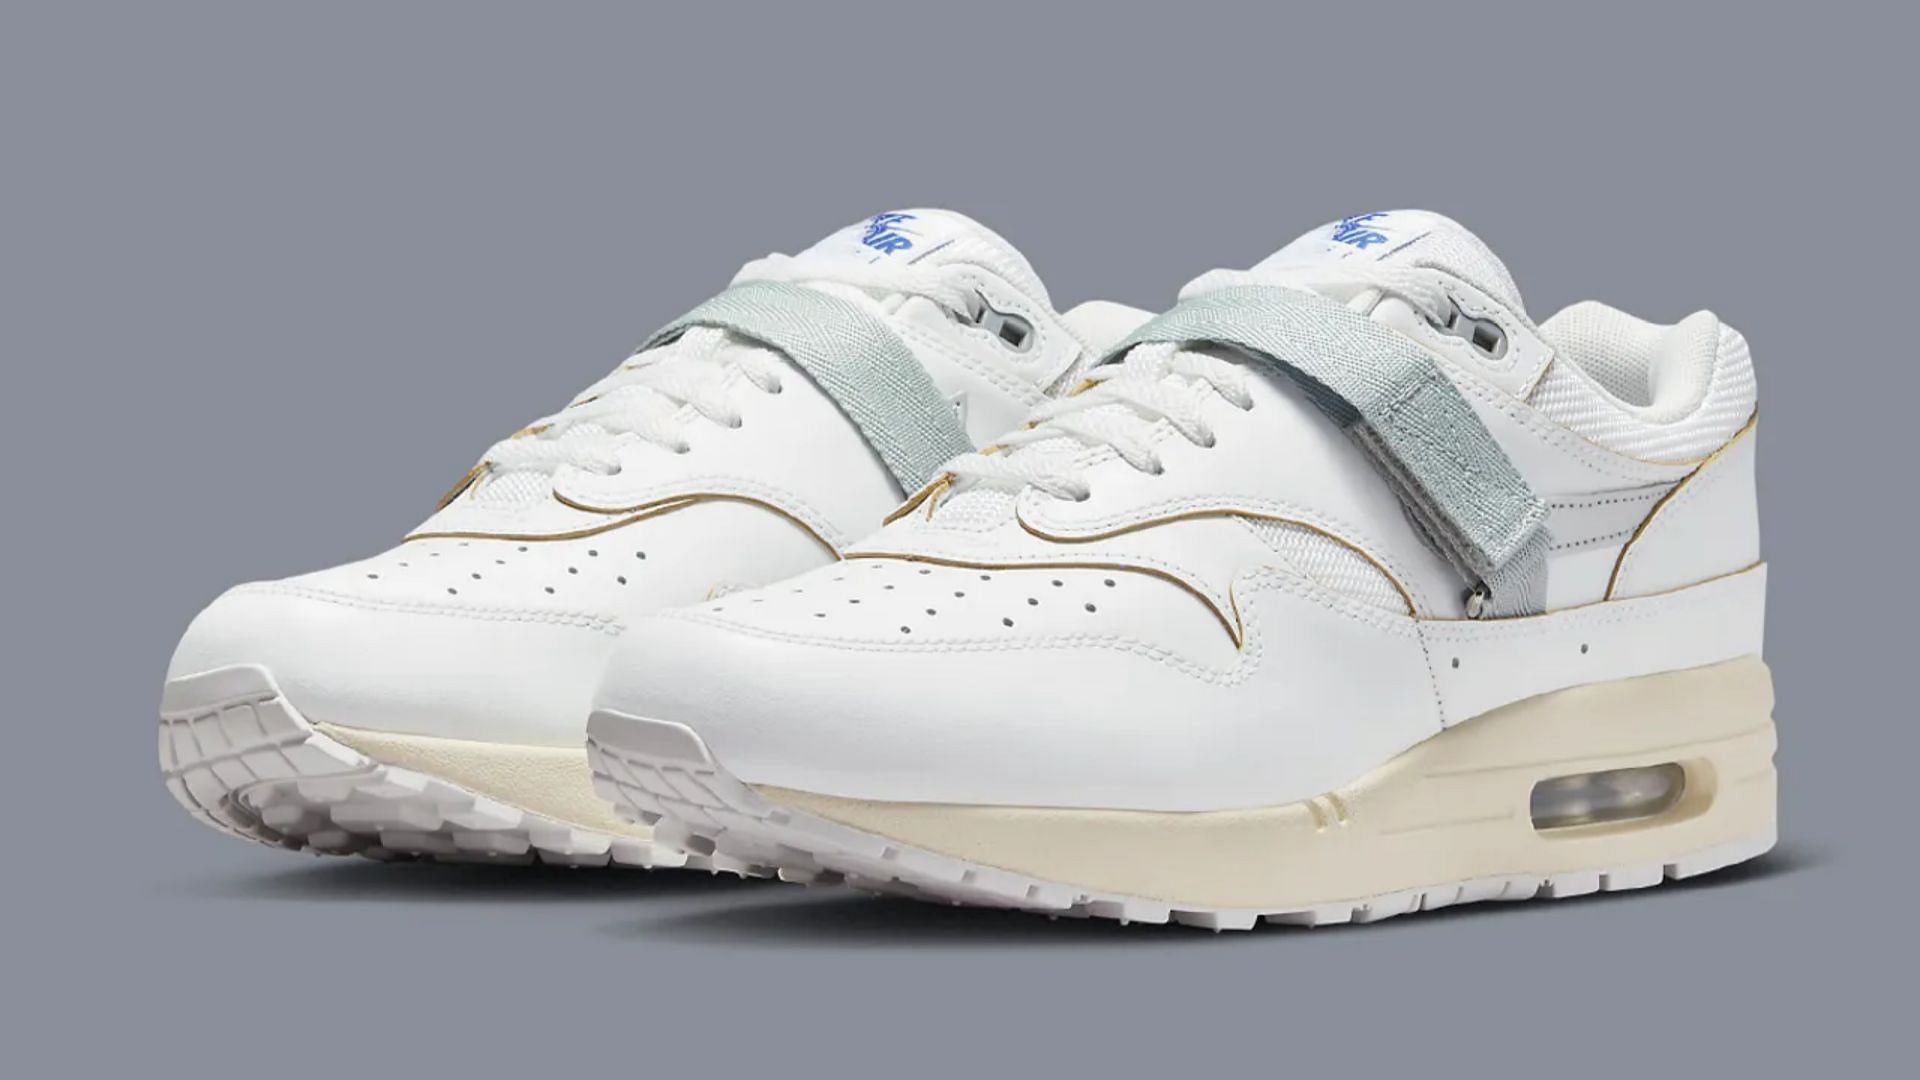 Nike Air Max 1 &quot;Timeless&quot; sneakers (Image via Nike)